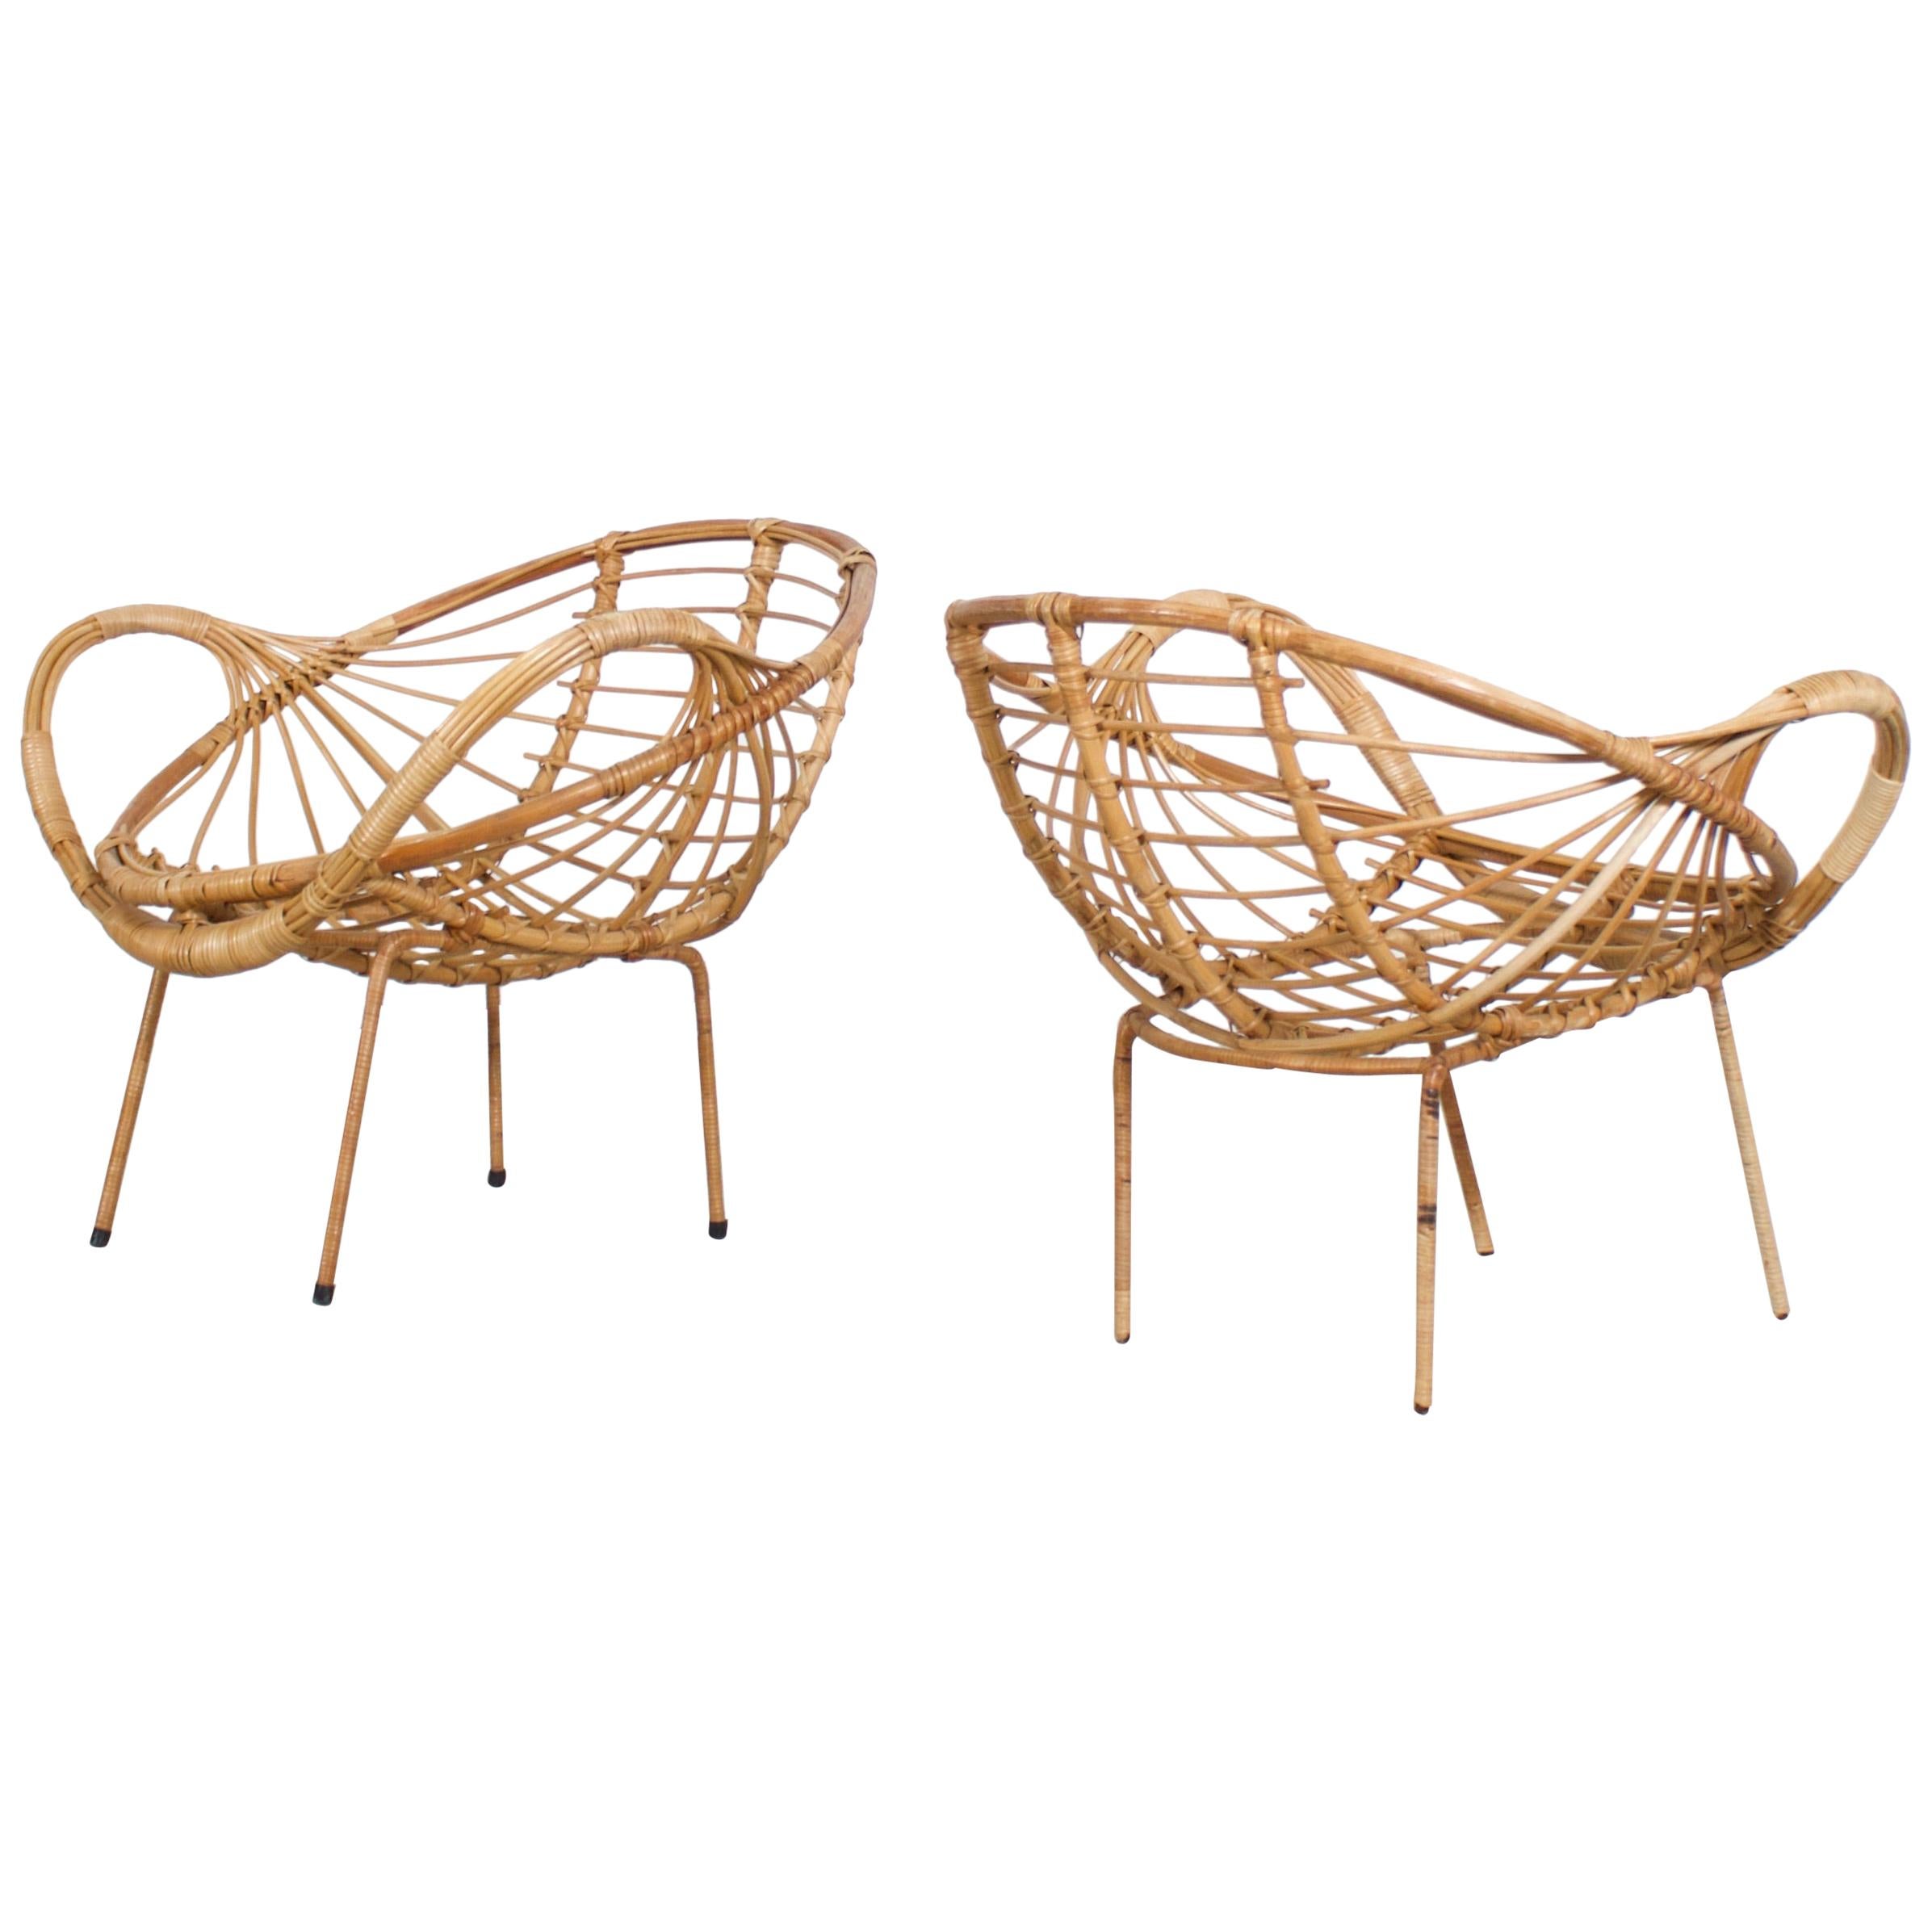 Midcentury Modern Rattan and Metal Armchairs, 1960s